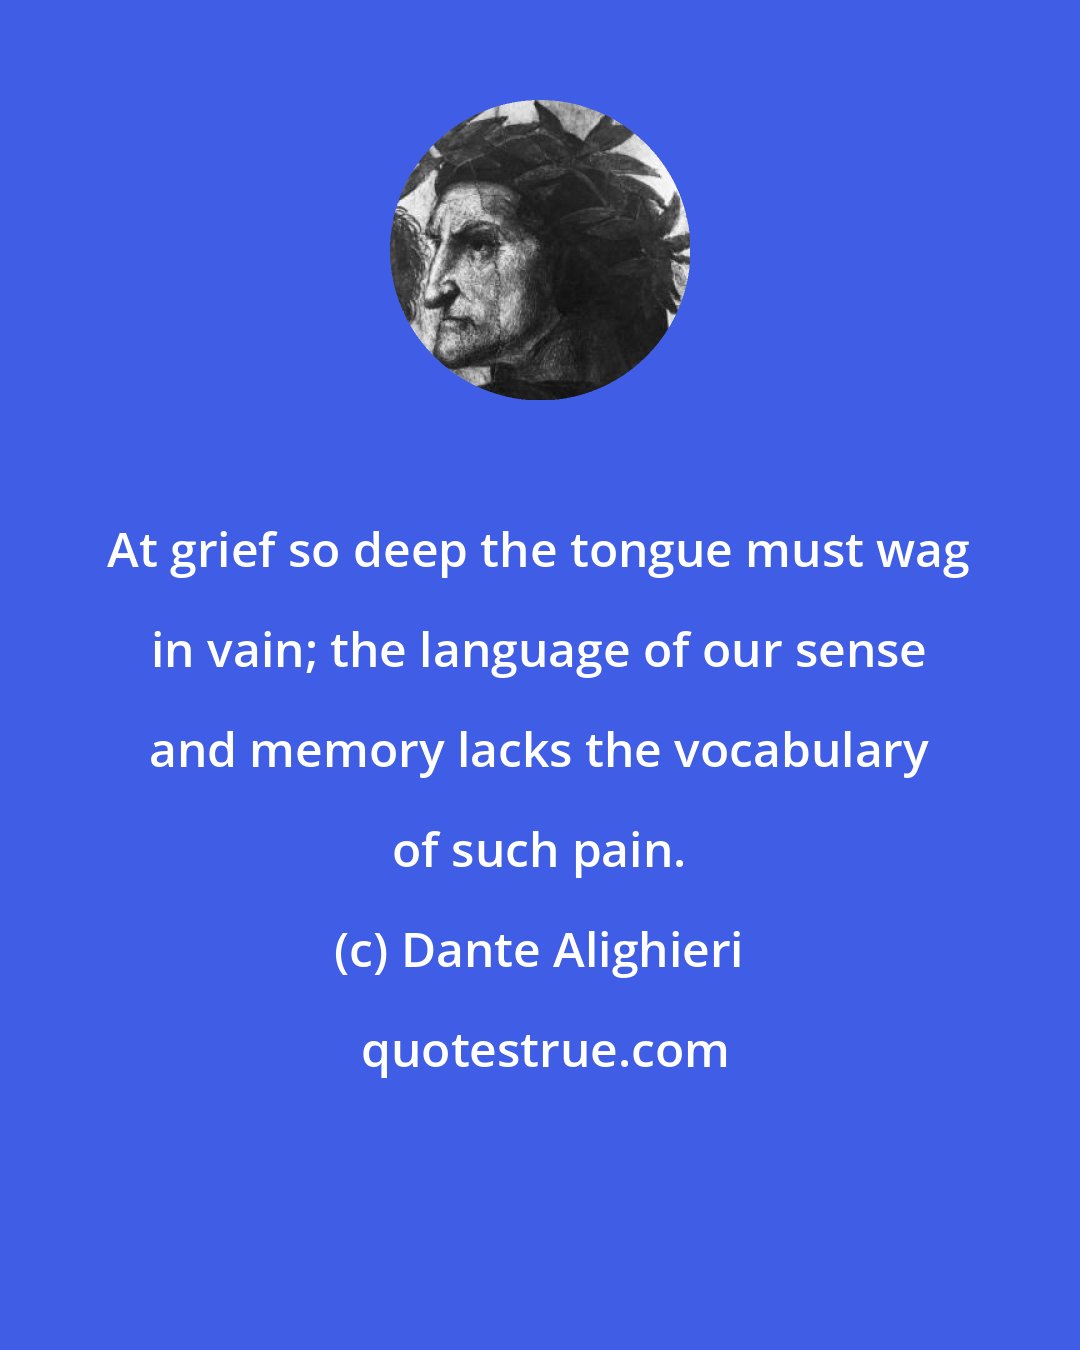 Dante Alighieri: At grief so deep the tongue must wag in vain; the language of our sense and memory lacks the vocabulary of such pain.